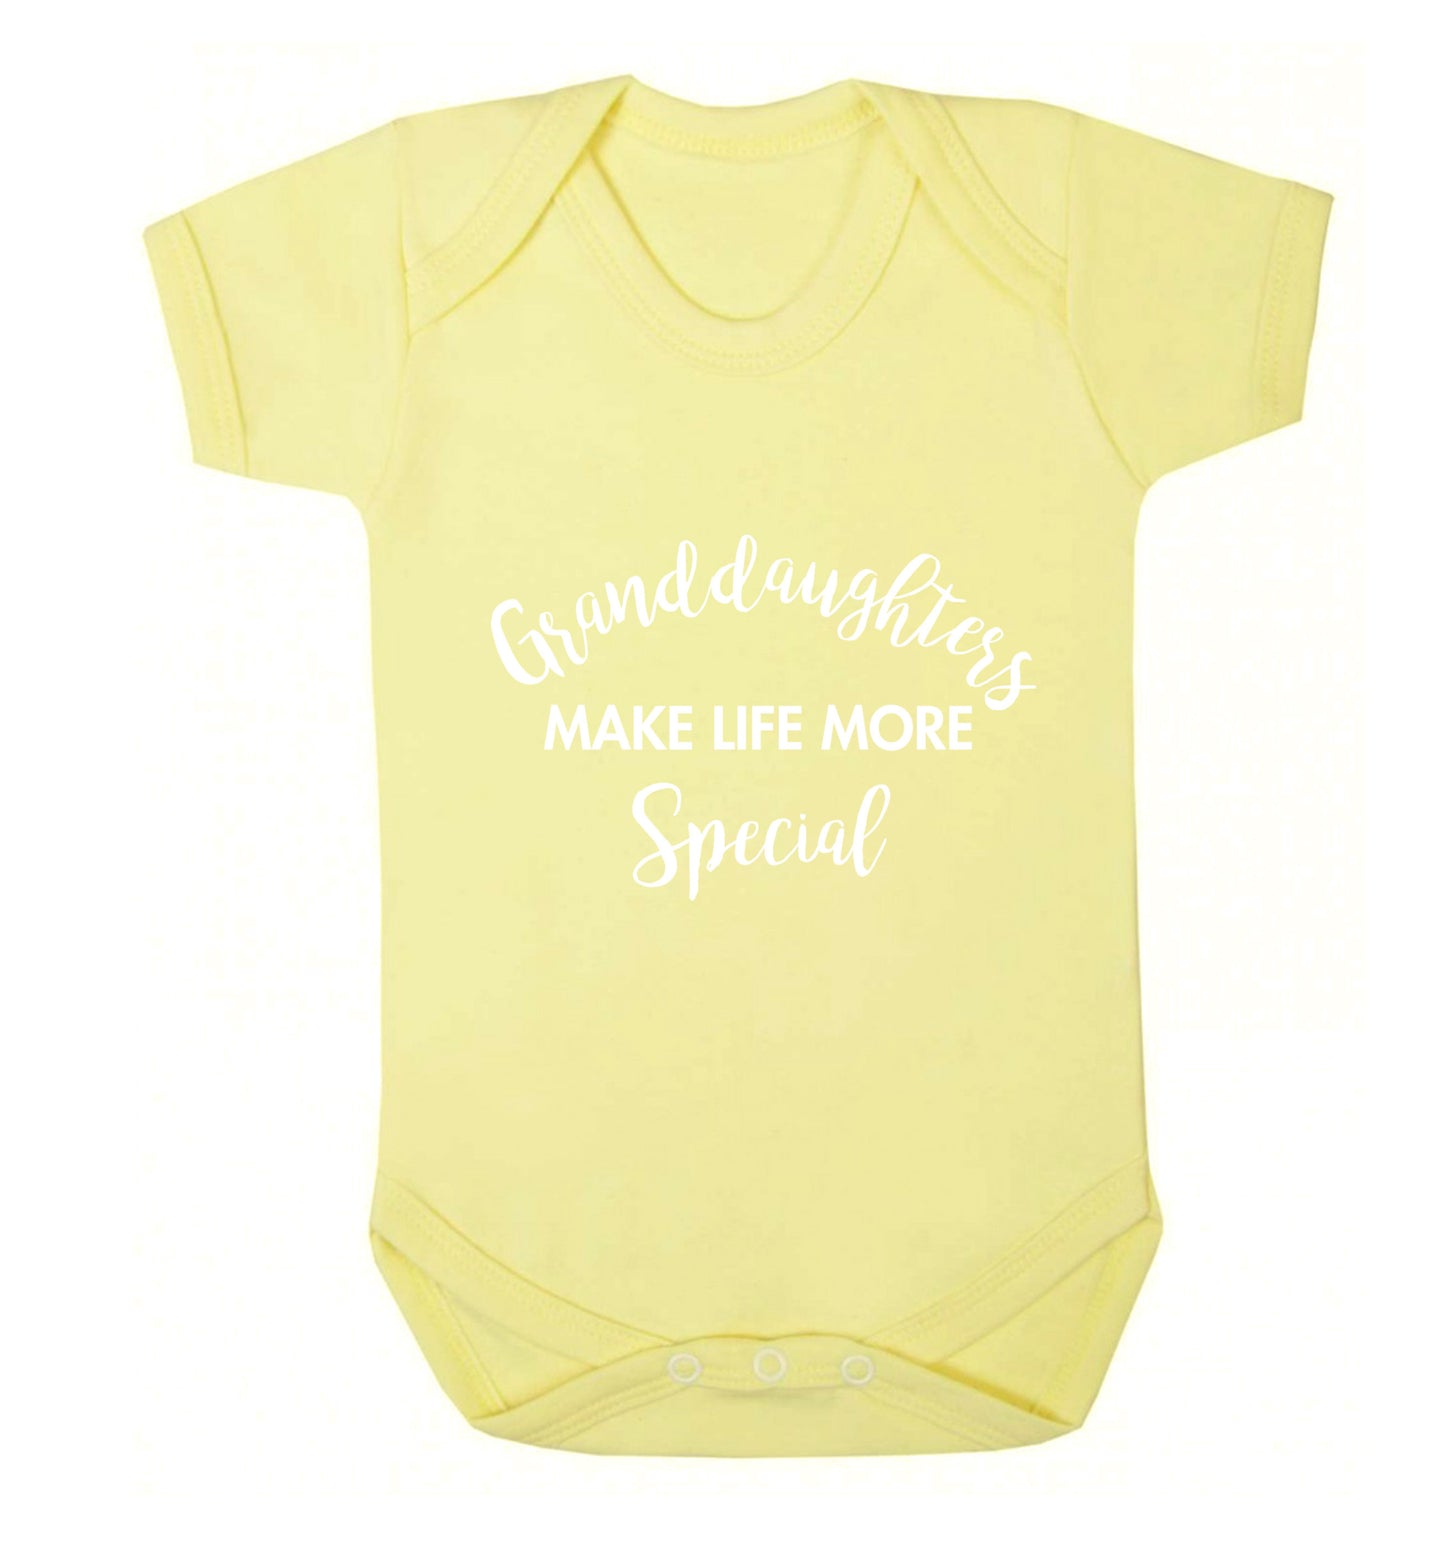 Granddaughters make life more special Baby Vest pale yellow 18-24 months